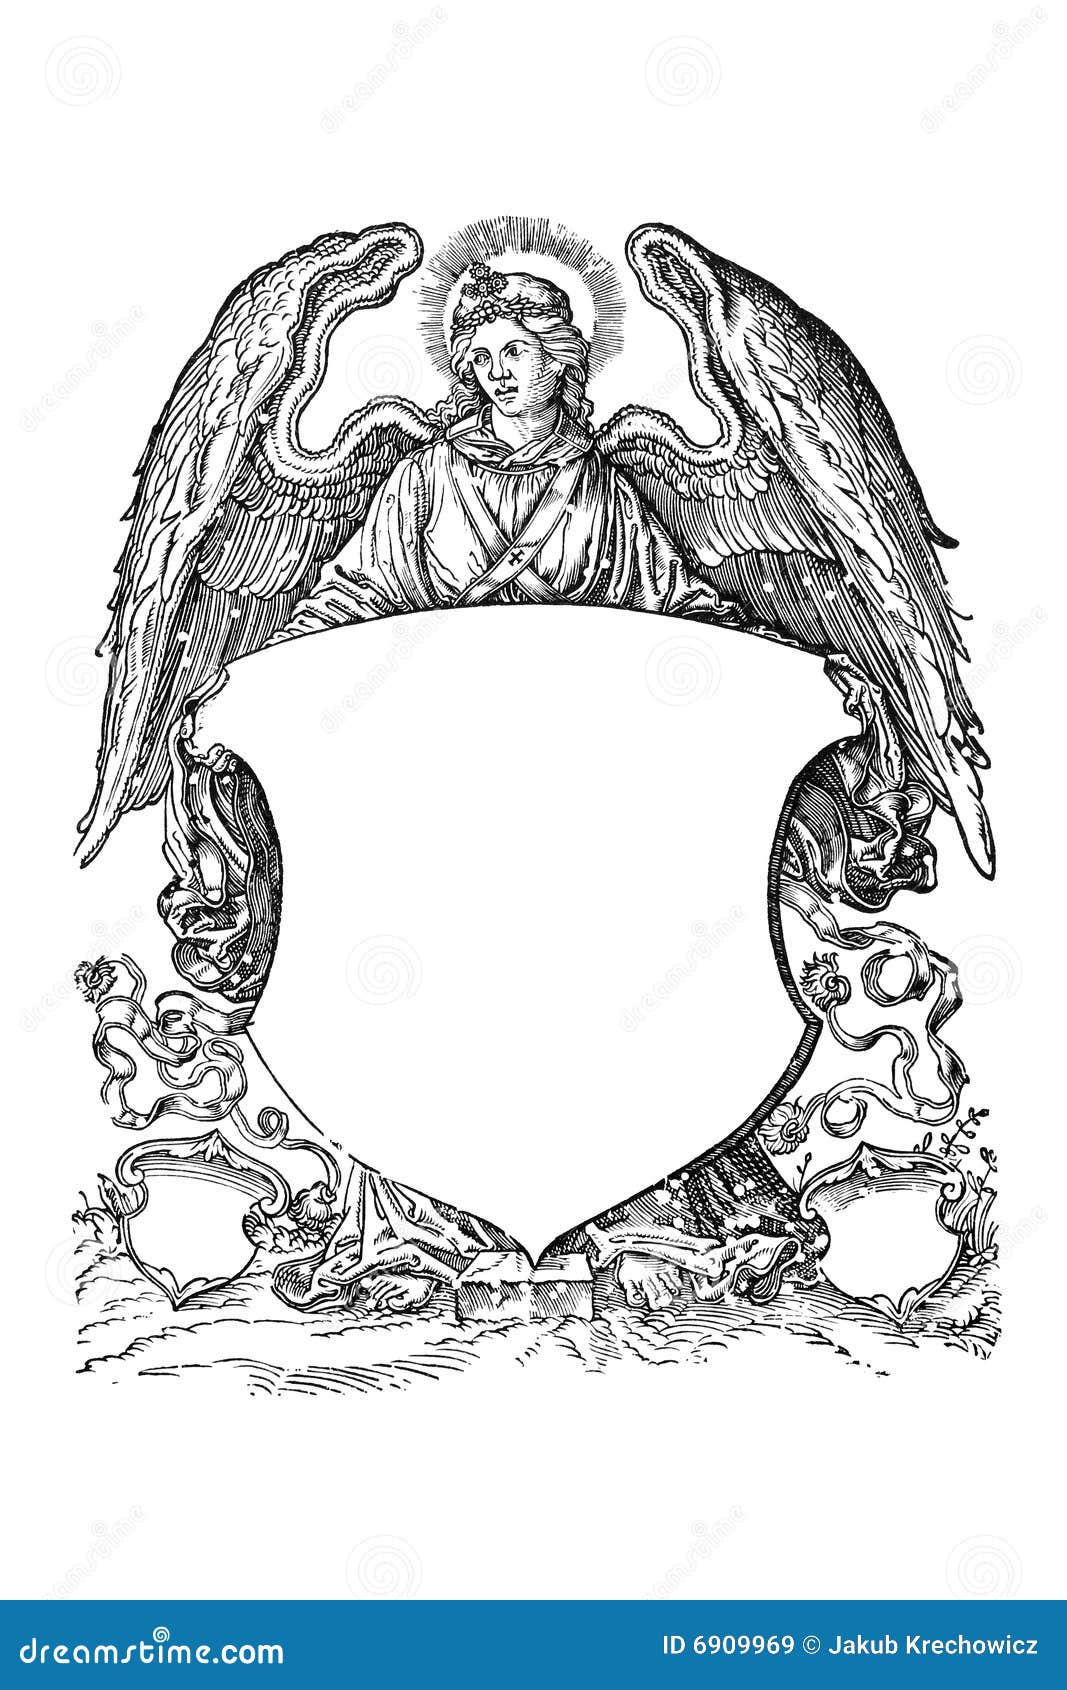 angel with coat of arms from 16th century